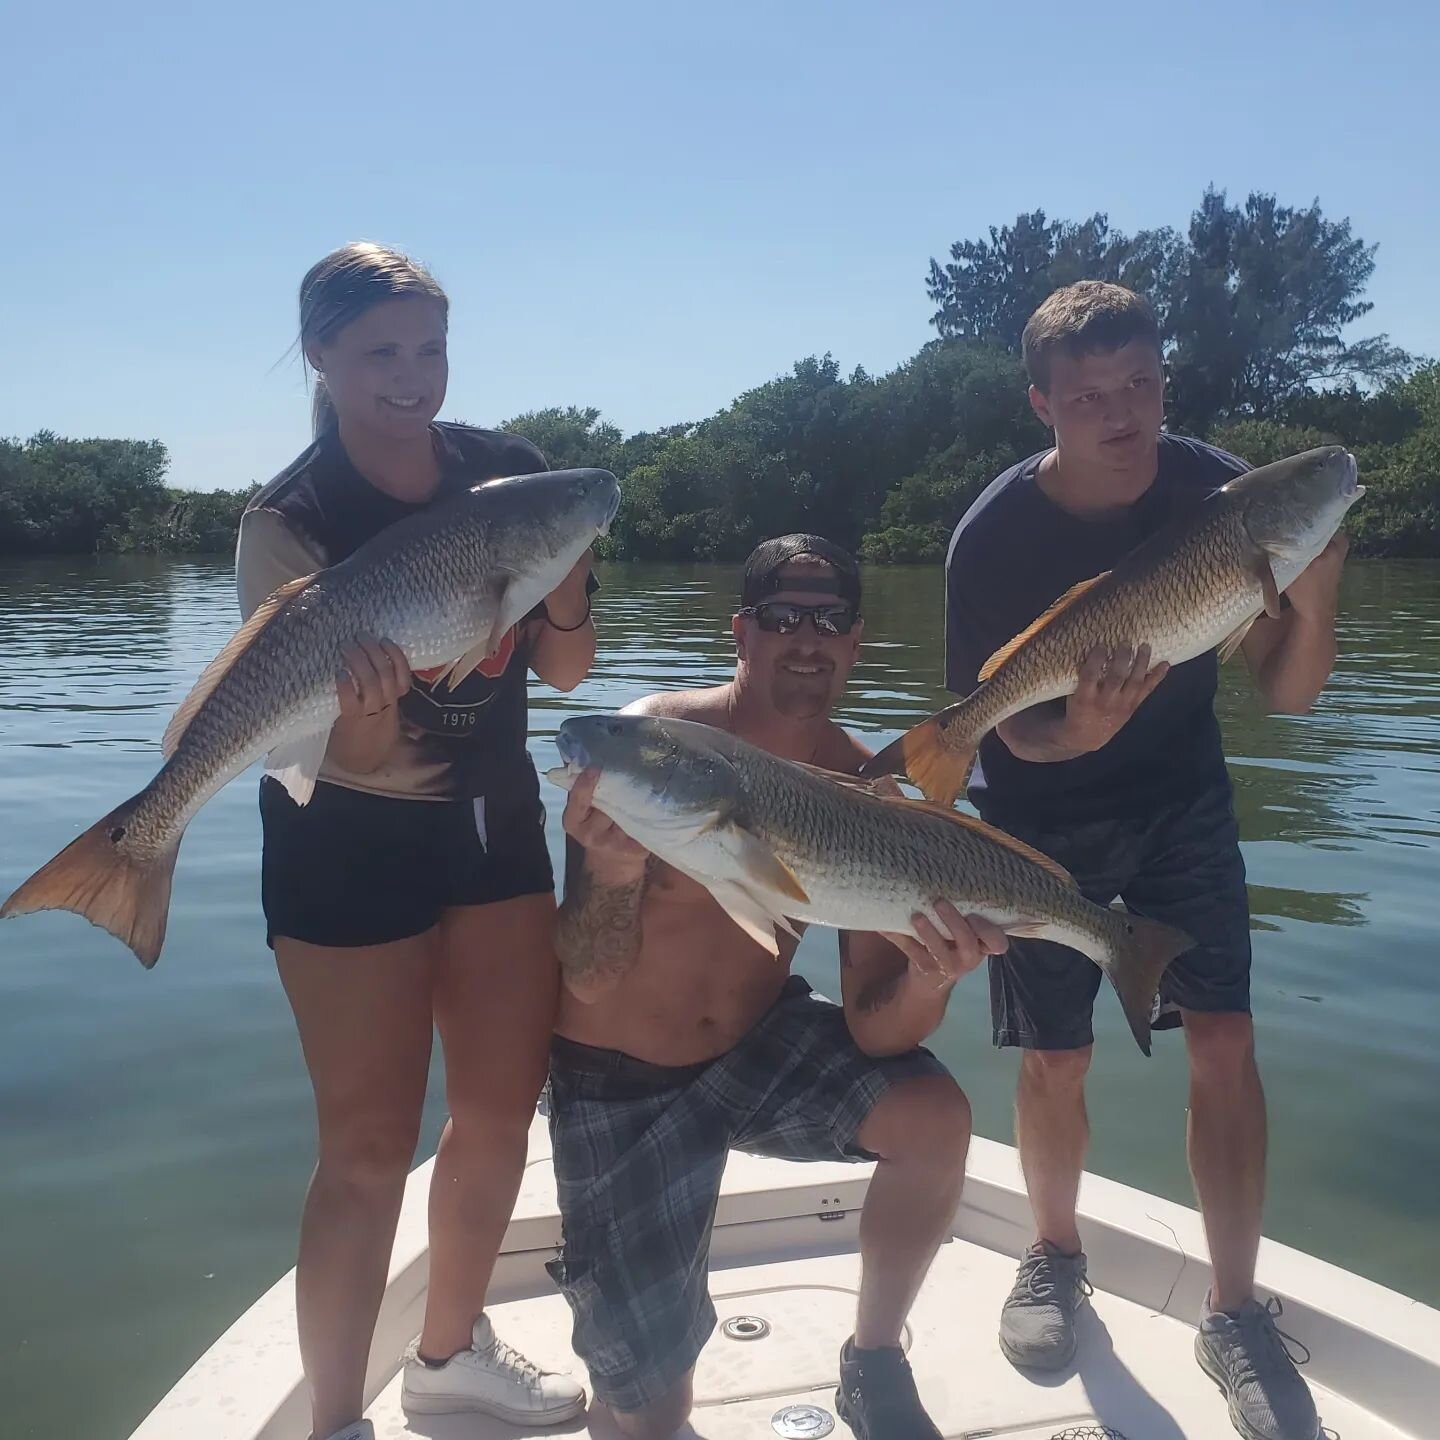 Redfish party in Tampa Bay!
www.storymakerfishingcharters.com 
813-431-9205  Come get some!

@pennfishing @simradyachting @saltlife @cca_florida @realsaltlife @pelicancoolers @yamahaoutboards  @power.pole @stpetefl @leftcoastboatworks
@skeeter_boats 